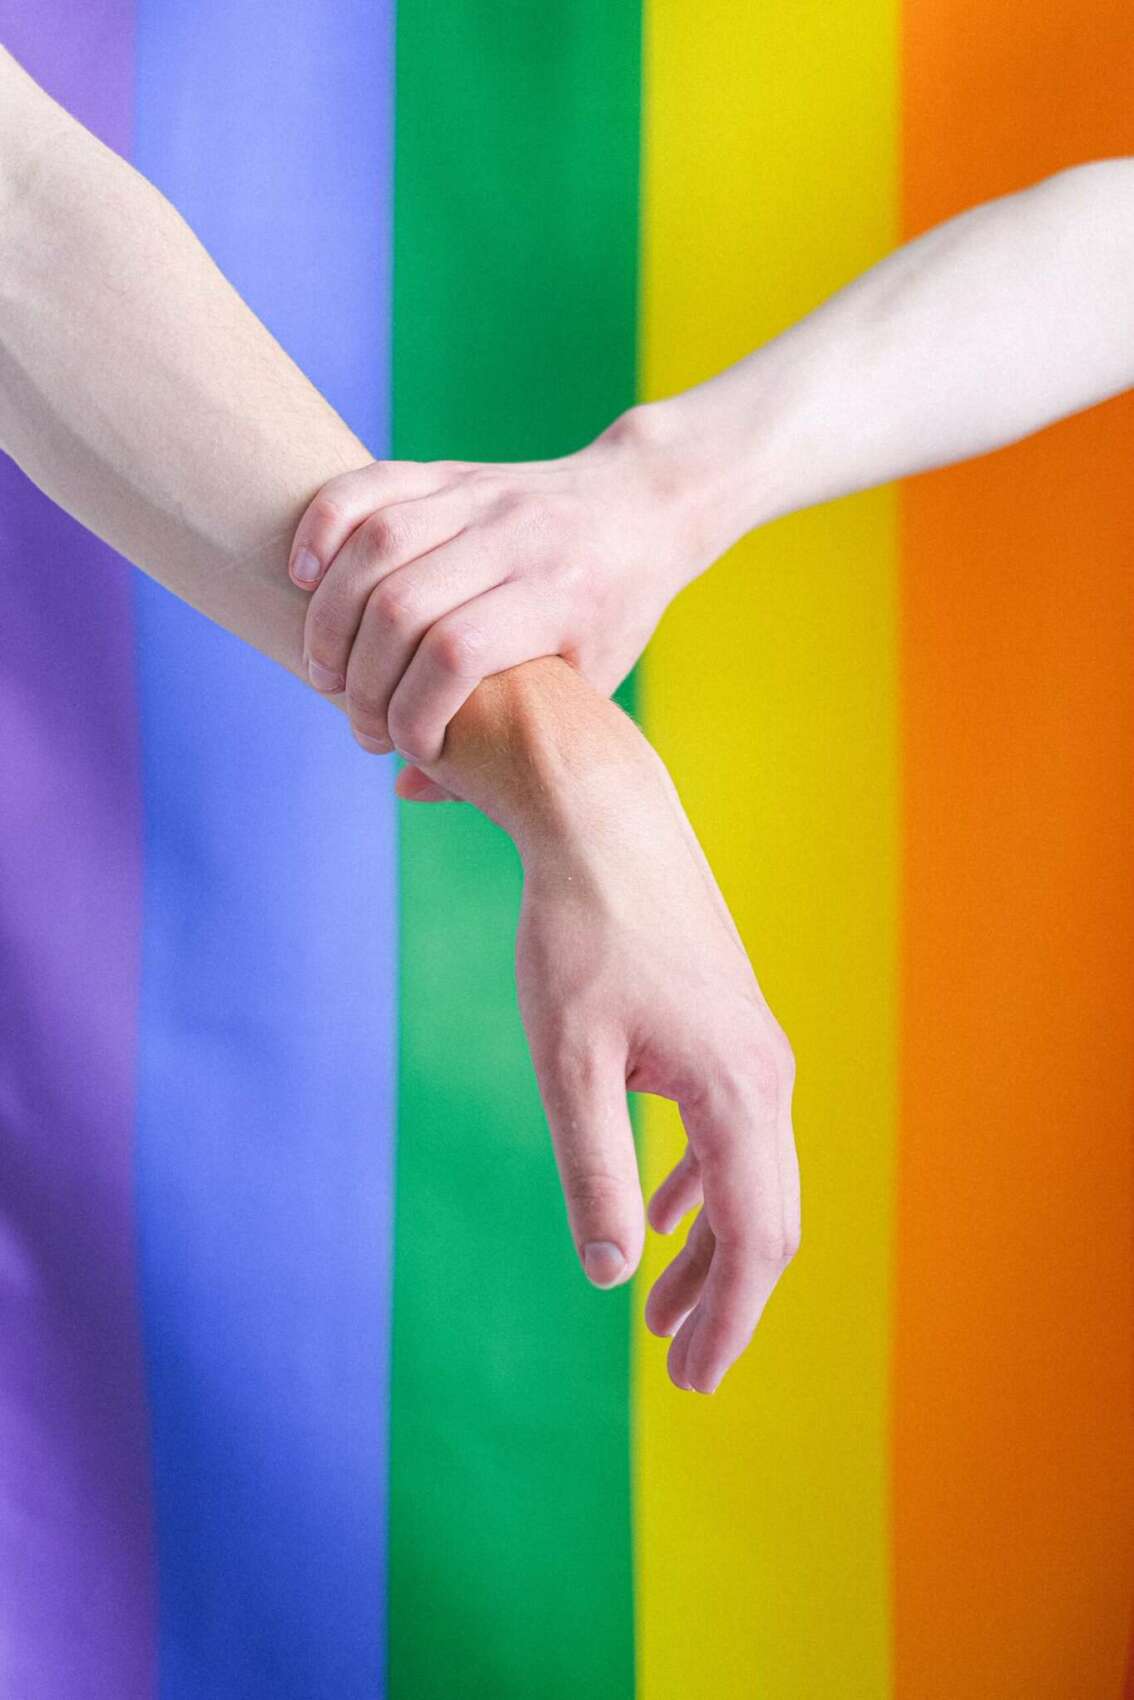 arms-in-front-of-a-gay-pride-flag-4611697